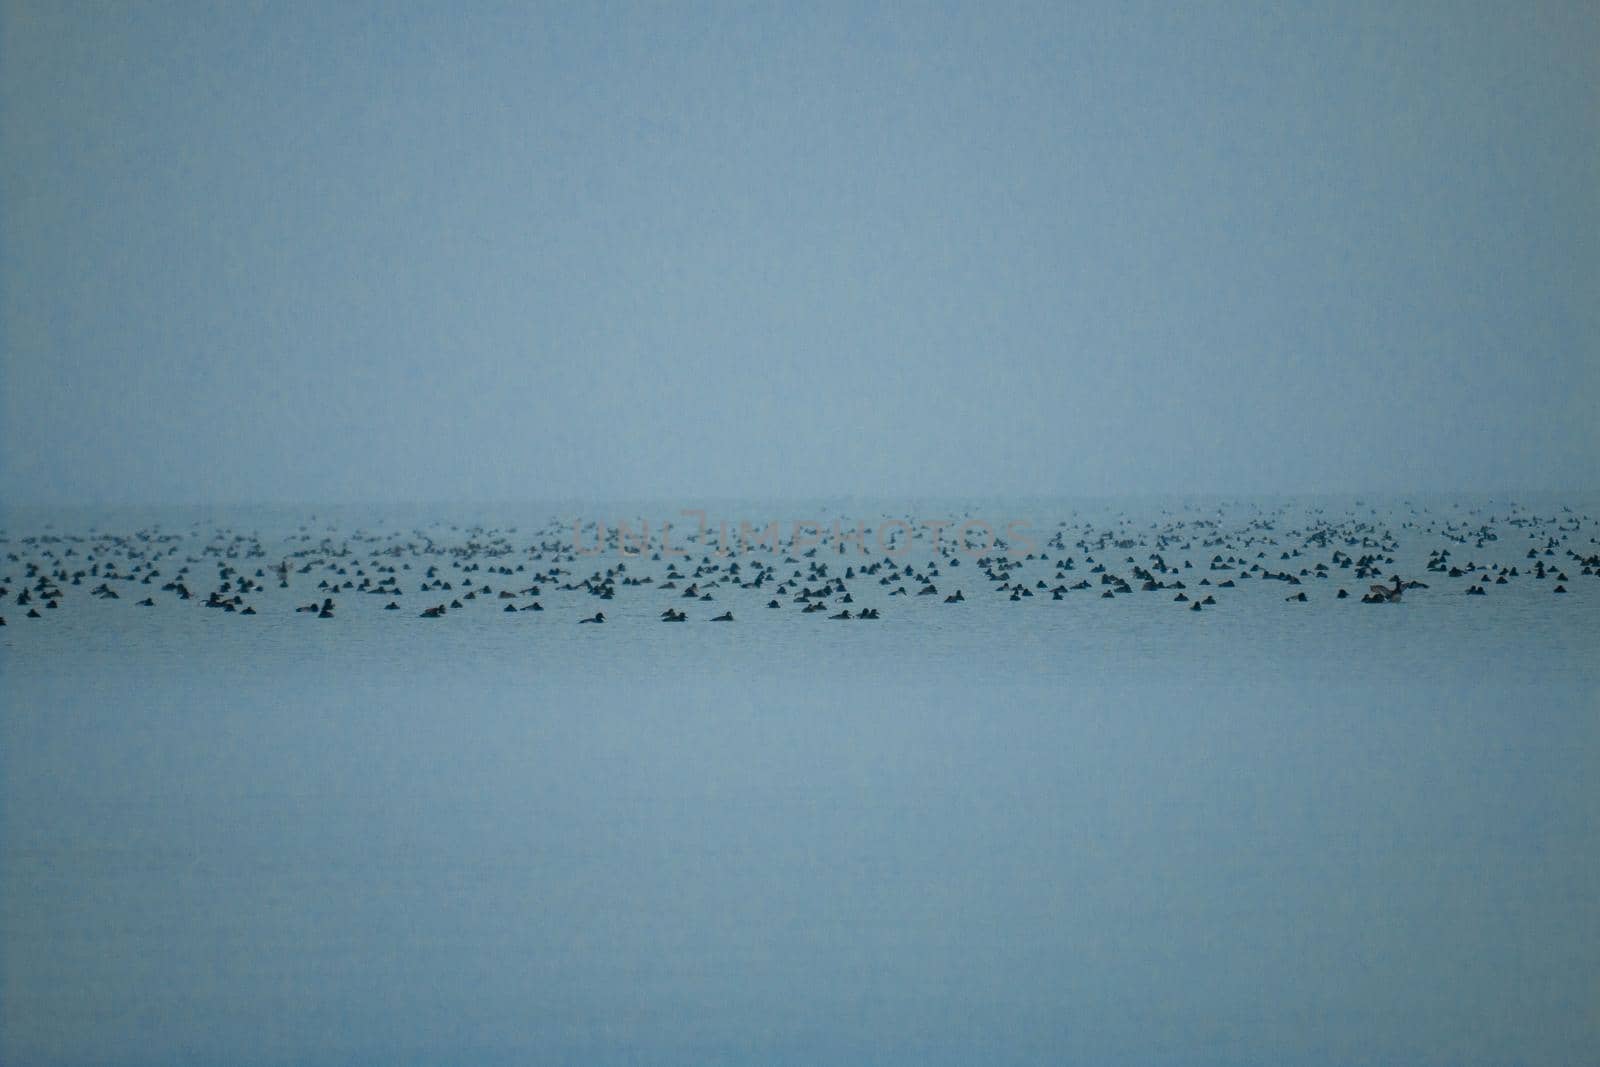 Tons of water birds out at shore in a beautiful misty photo  by mynewturtle1